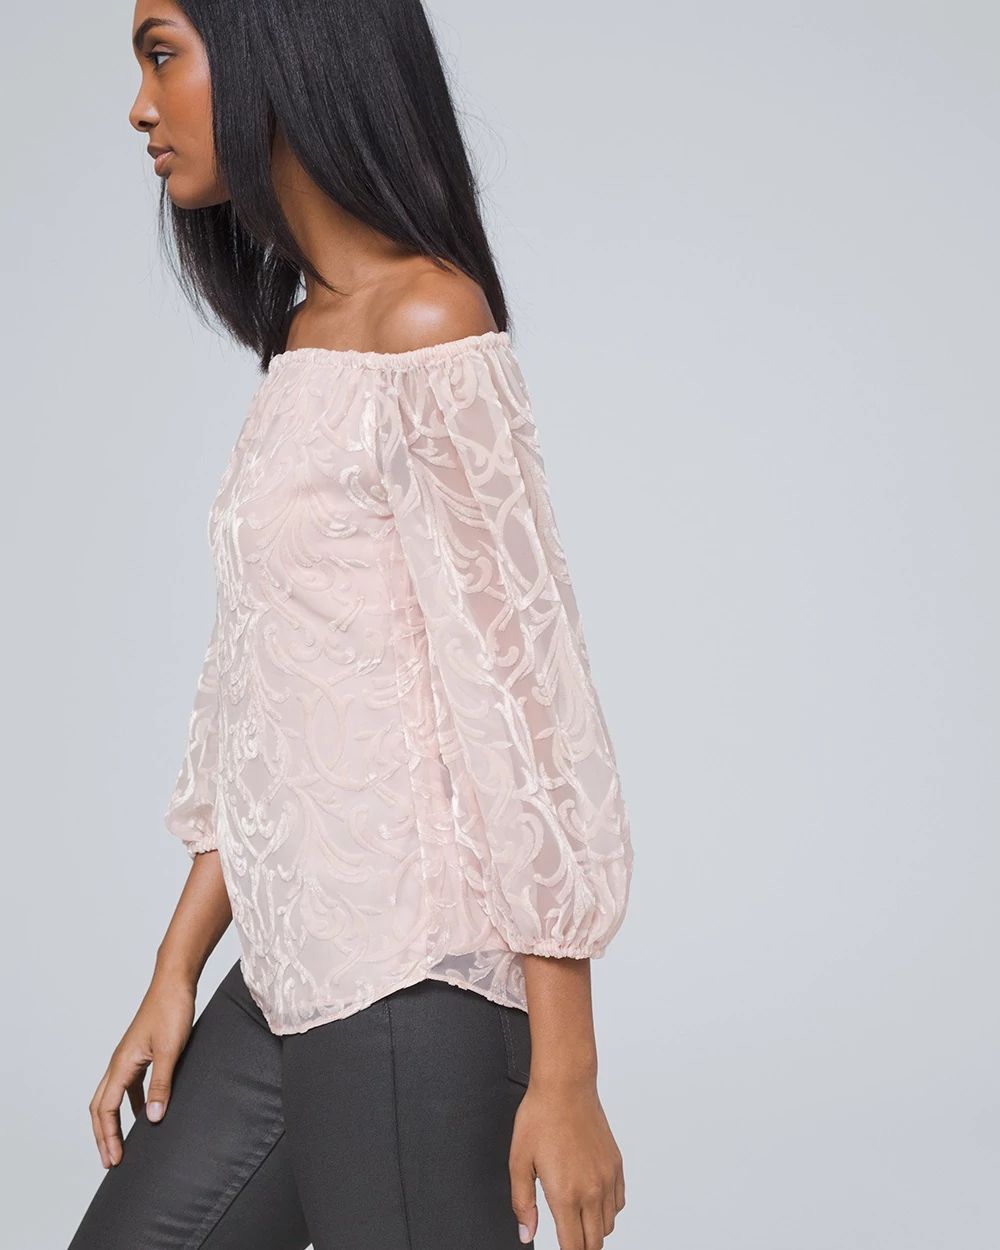 Velvet Off-the-Shoulder Blouse click to view larger image.